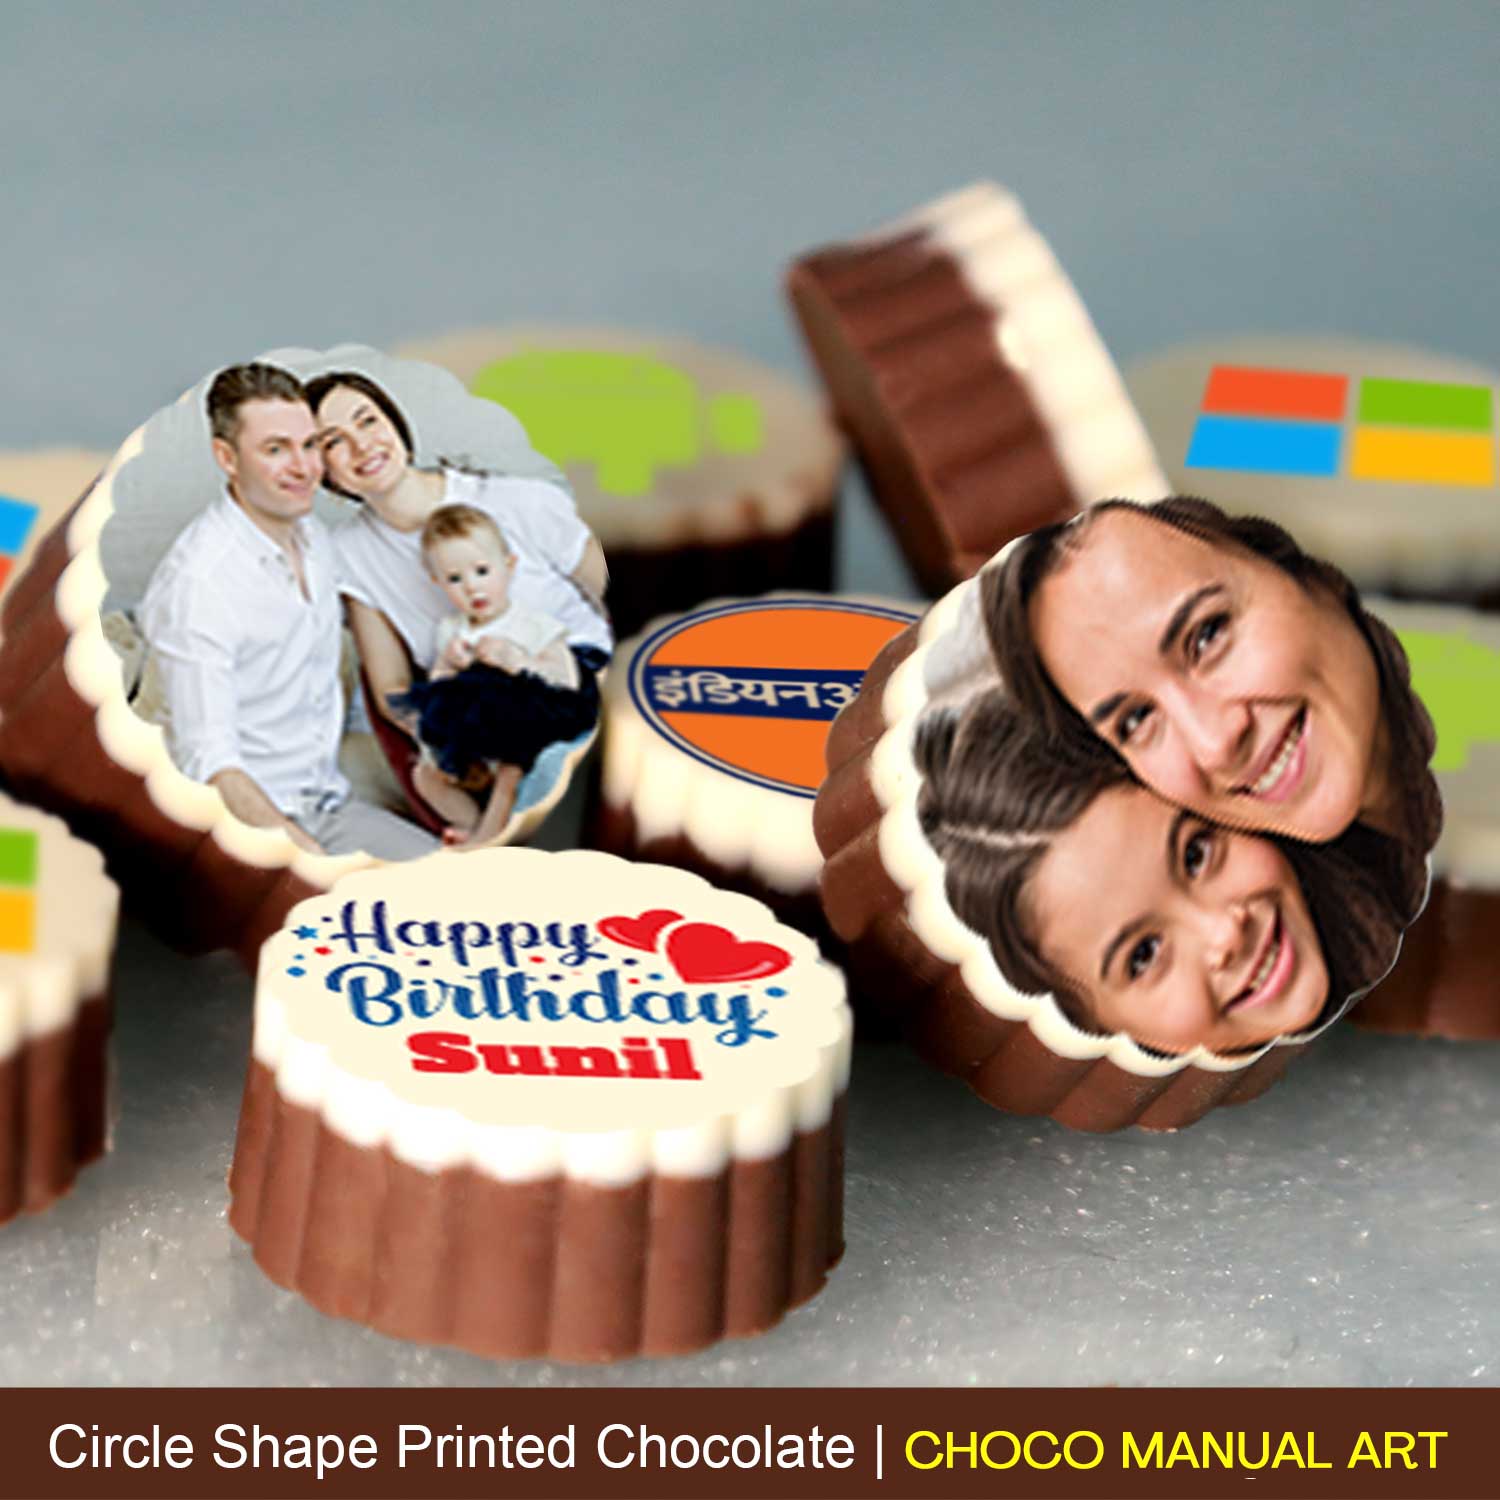 Blooming flowers with photo printed chocolates box for mom